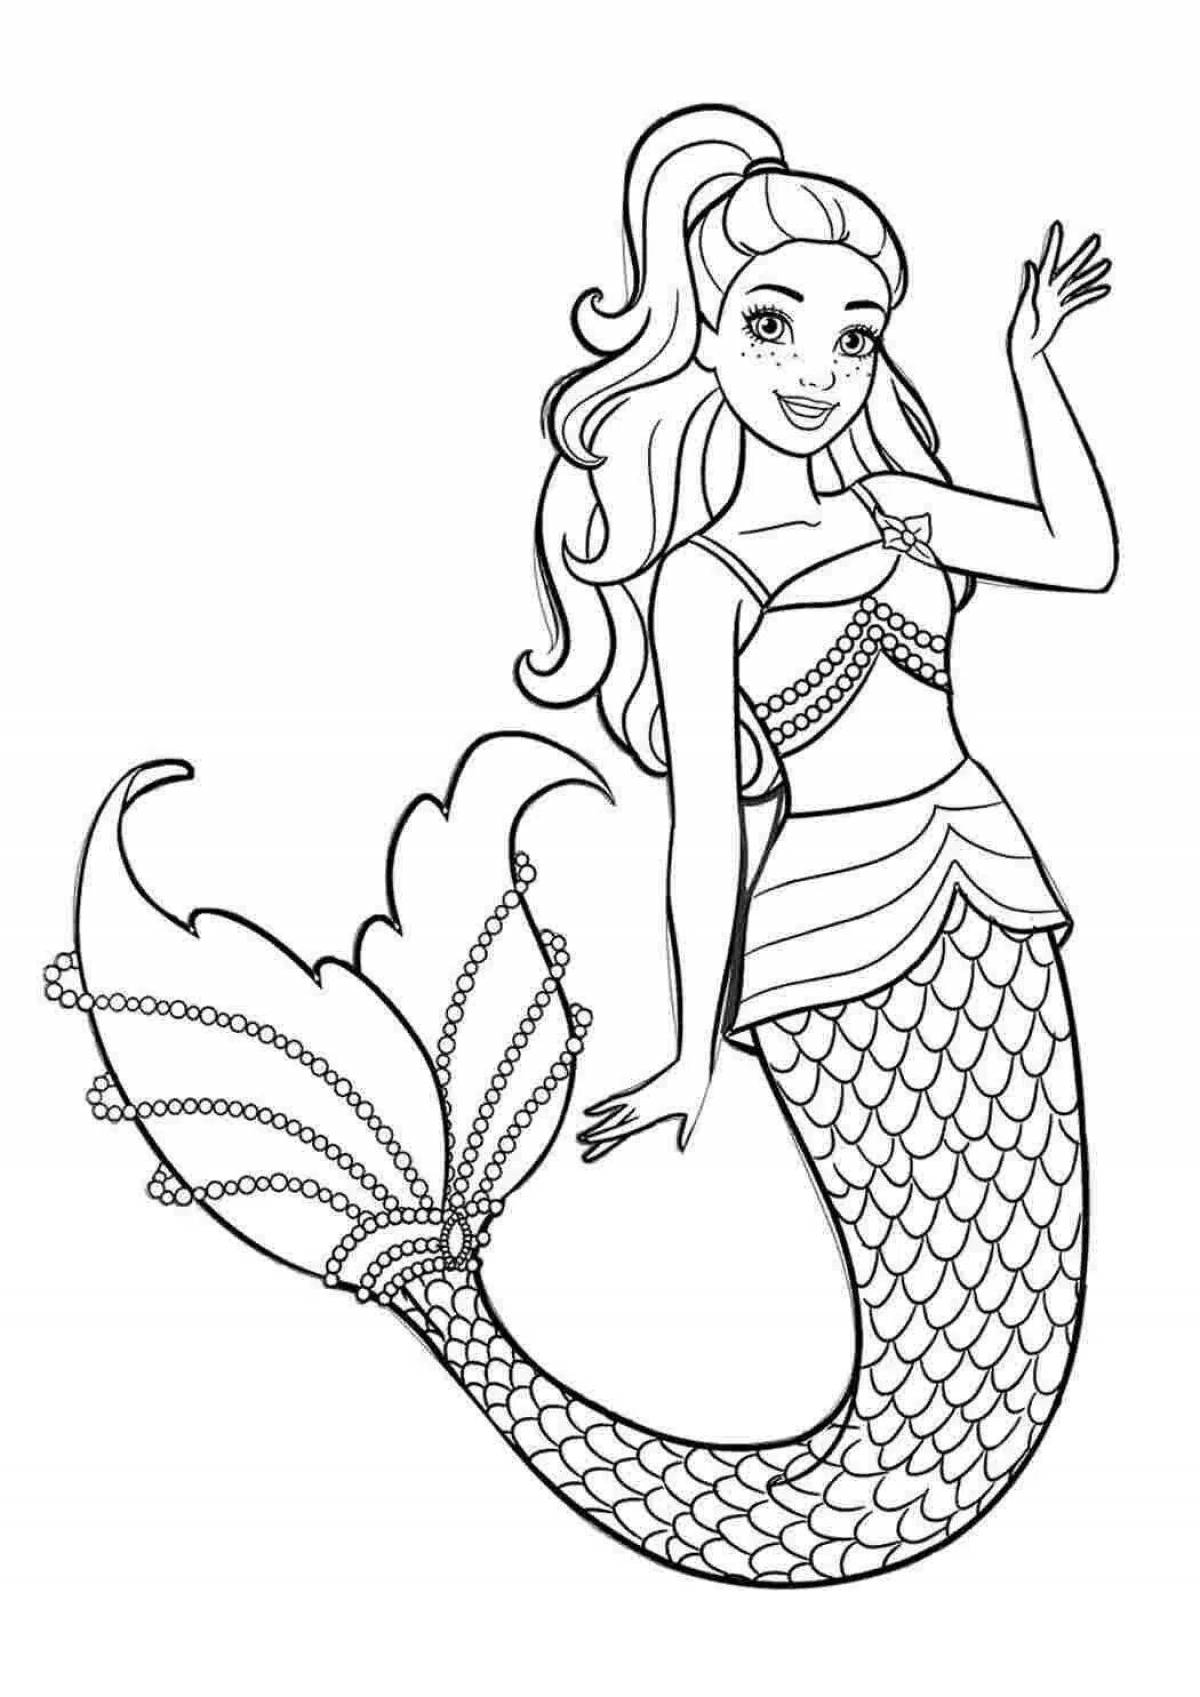 Themselves colorful-wonder coloring pages